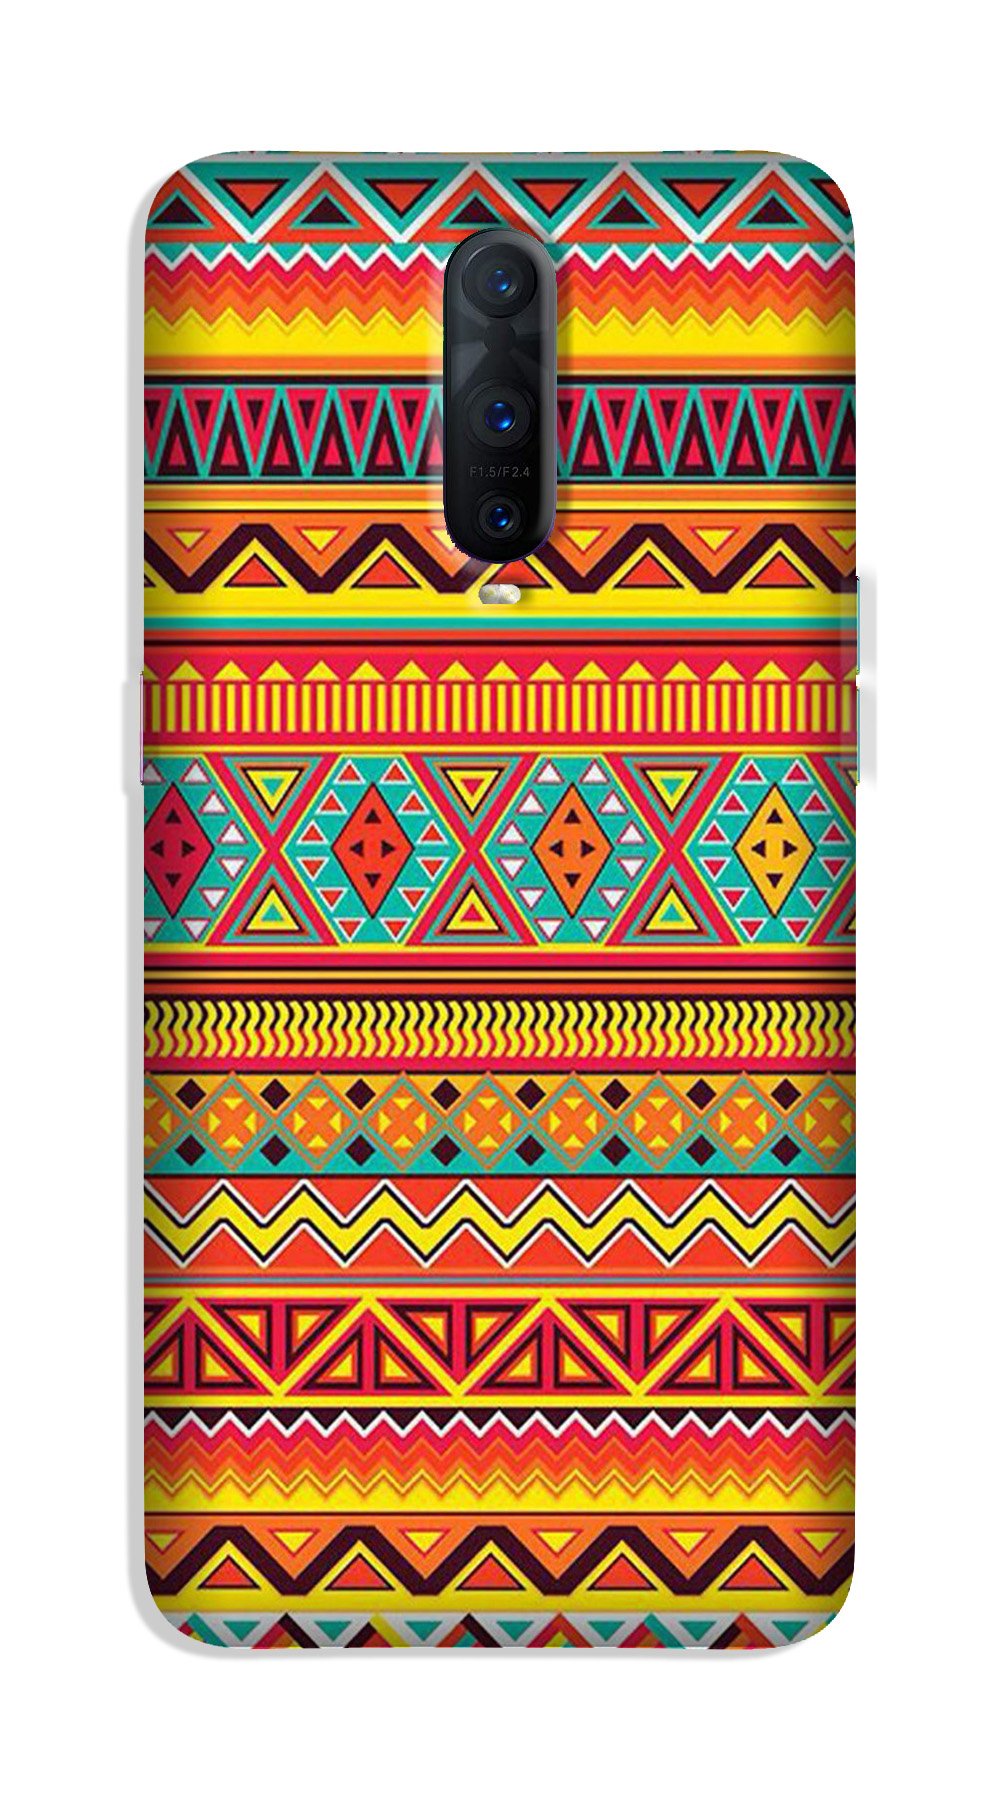 Zigzag line pattern Case for OnePlus 7 Pro